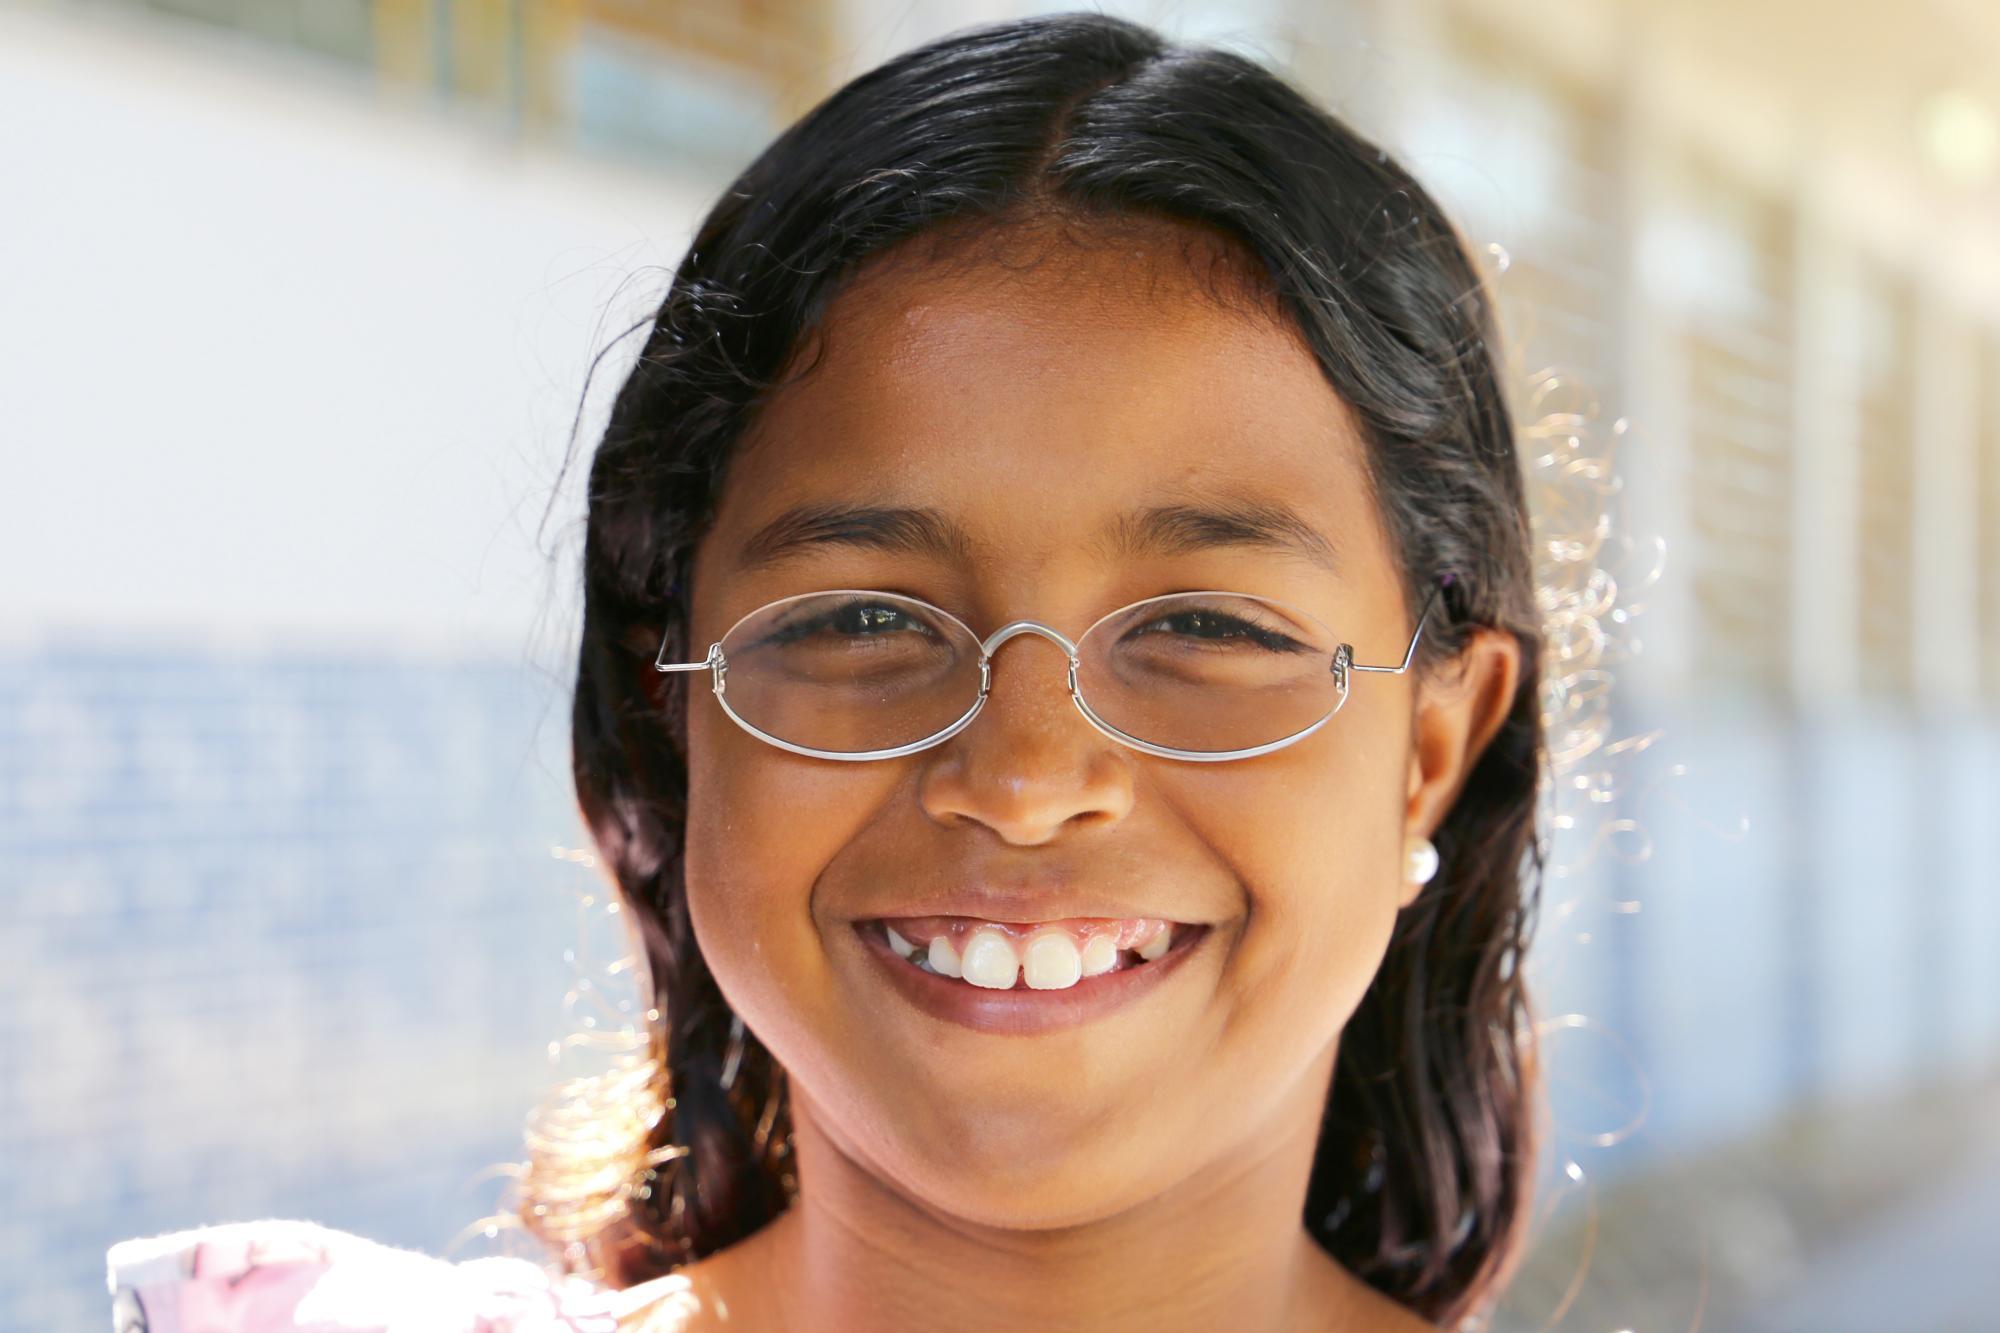 Girl from Brazil with OneDollarGlasses